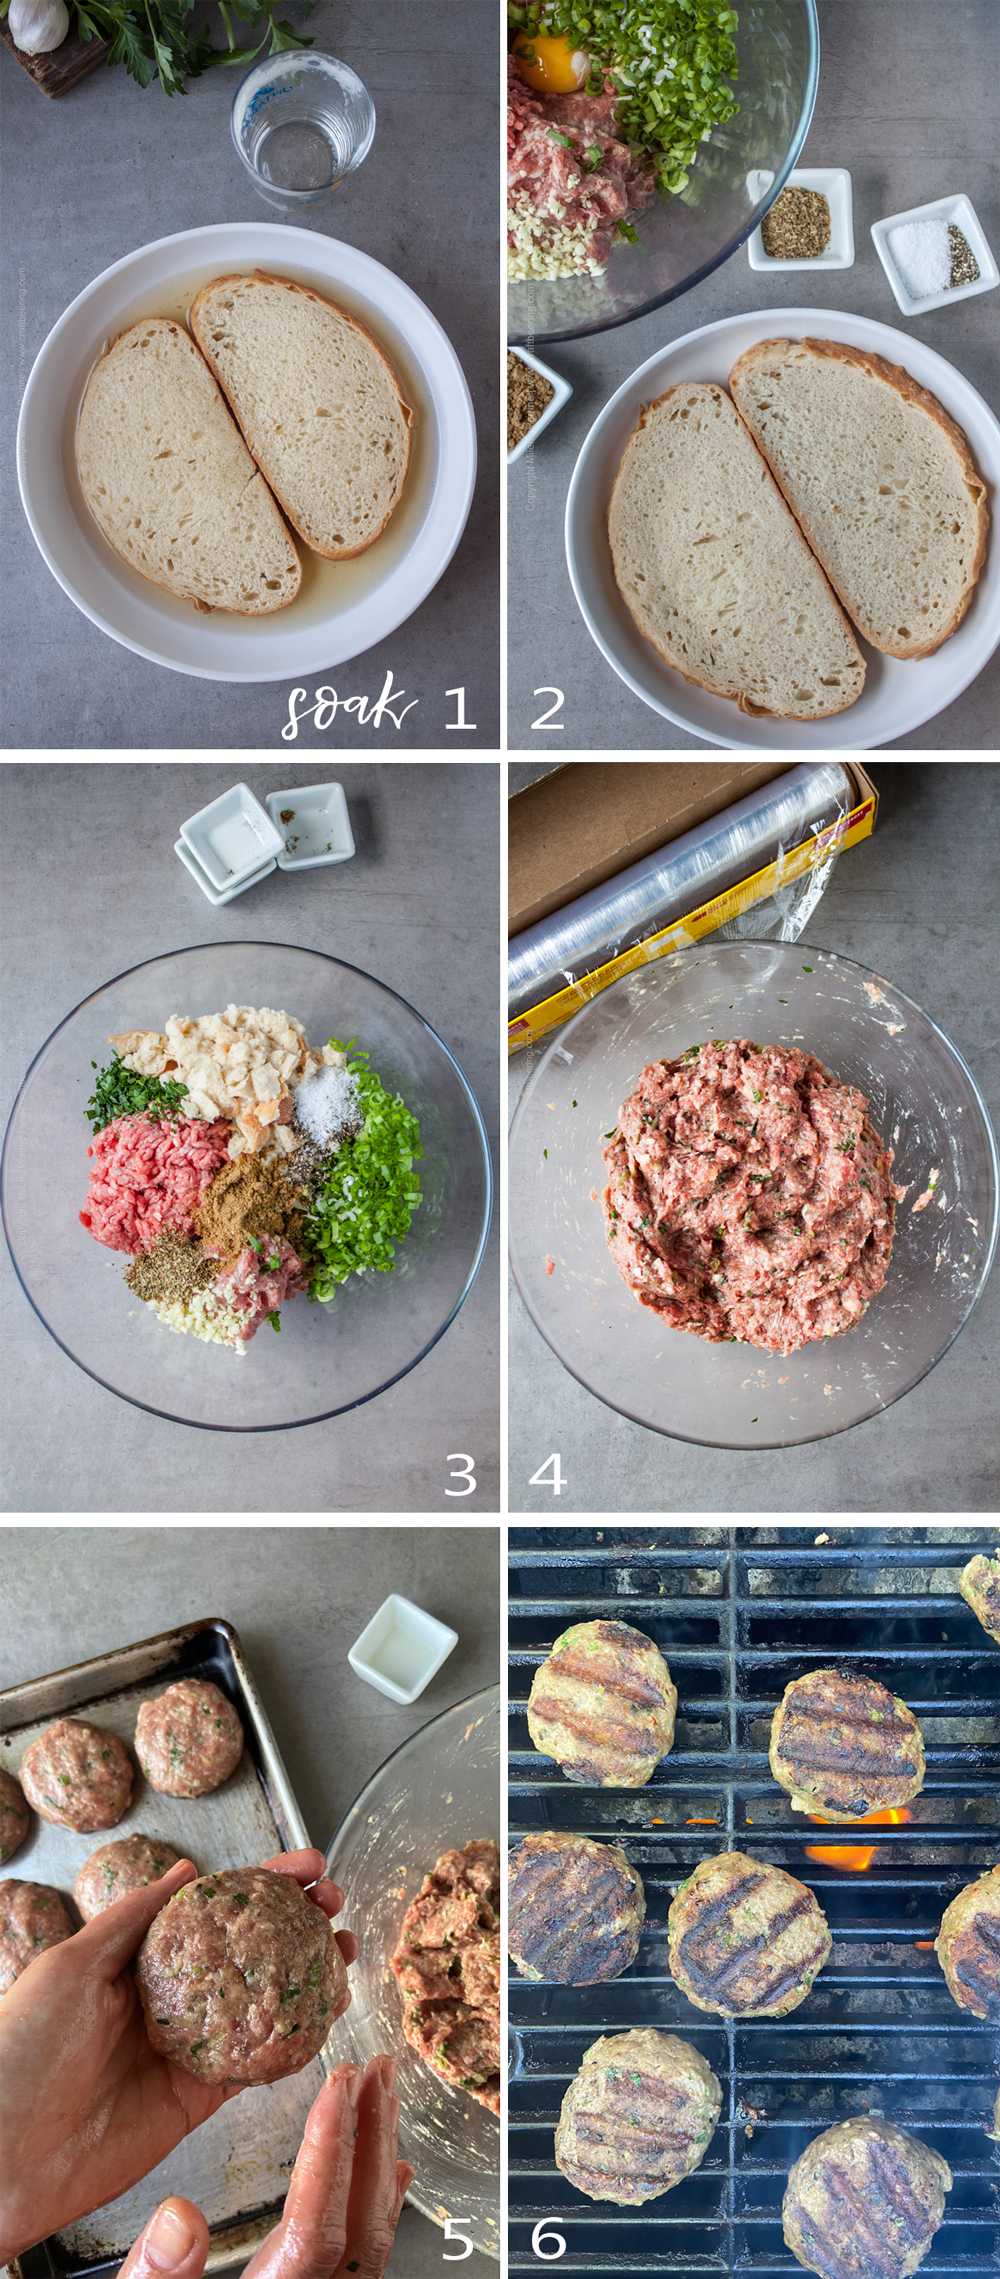 How to mix and grill kofta - step by step image grid. 